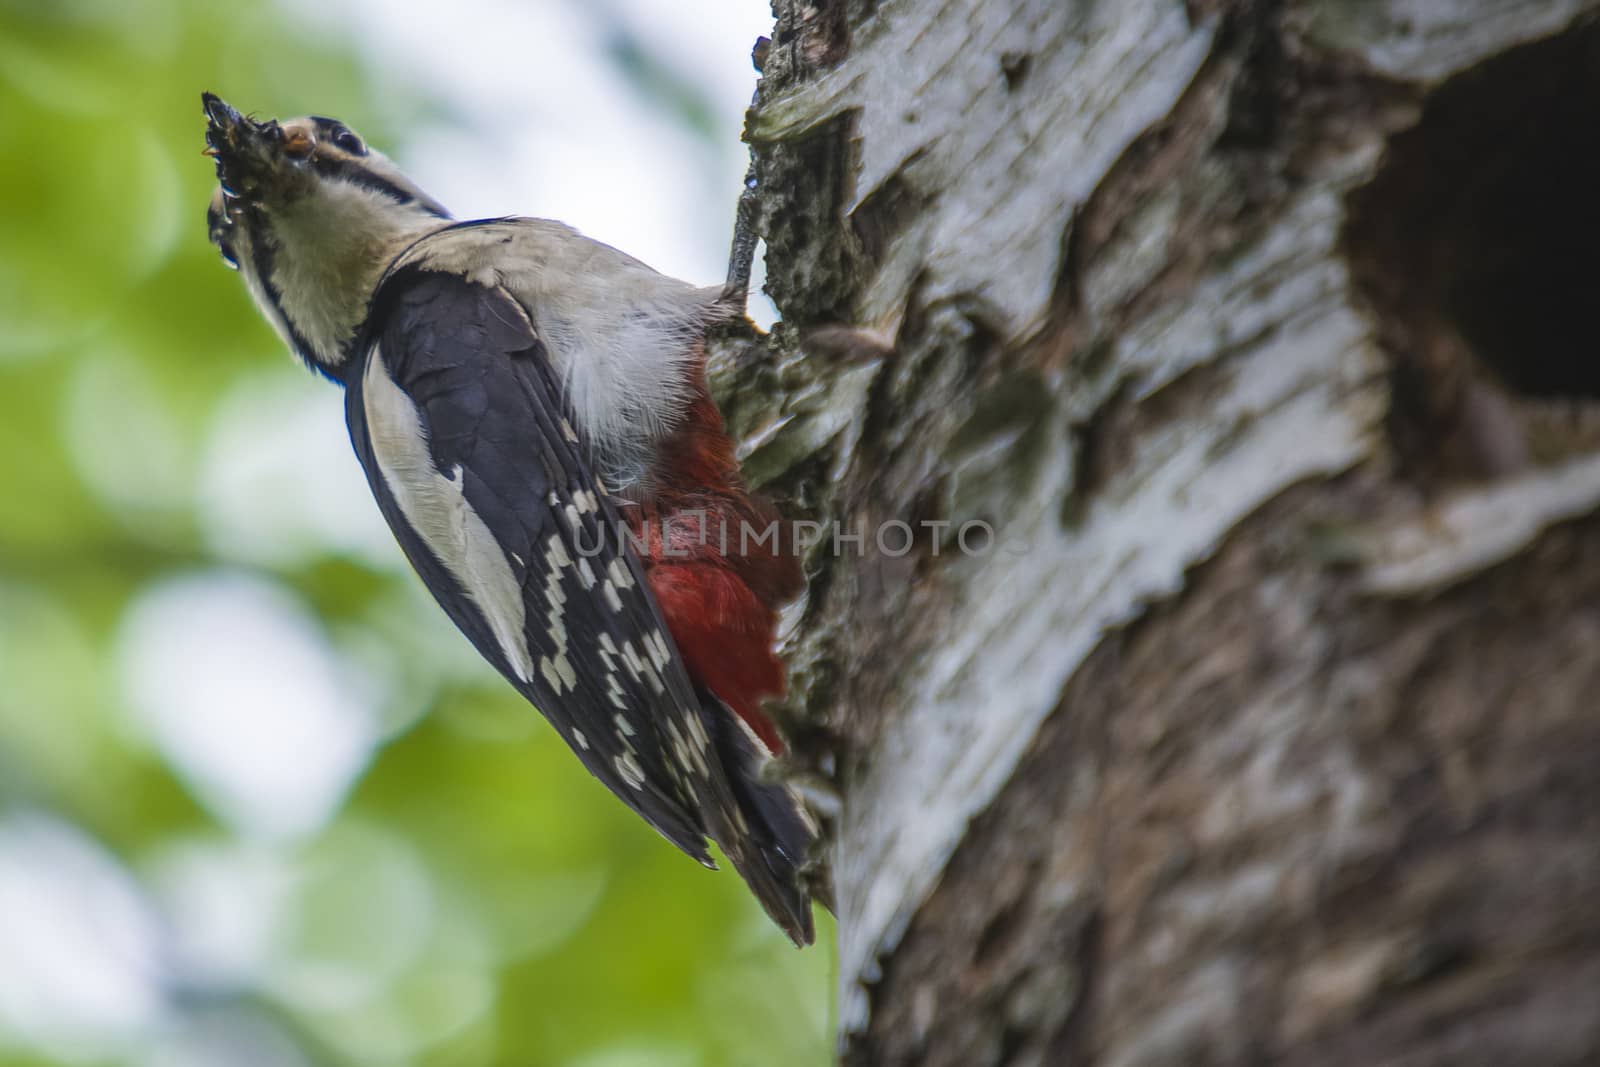 Great Spotted Woodpecker, Dendrocopos major currently has a hectic schedule to feed their kids. The picture is shot by Roeds-mountain in Halden, Norway.